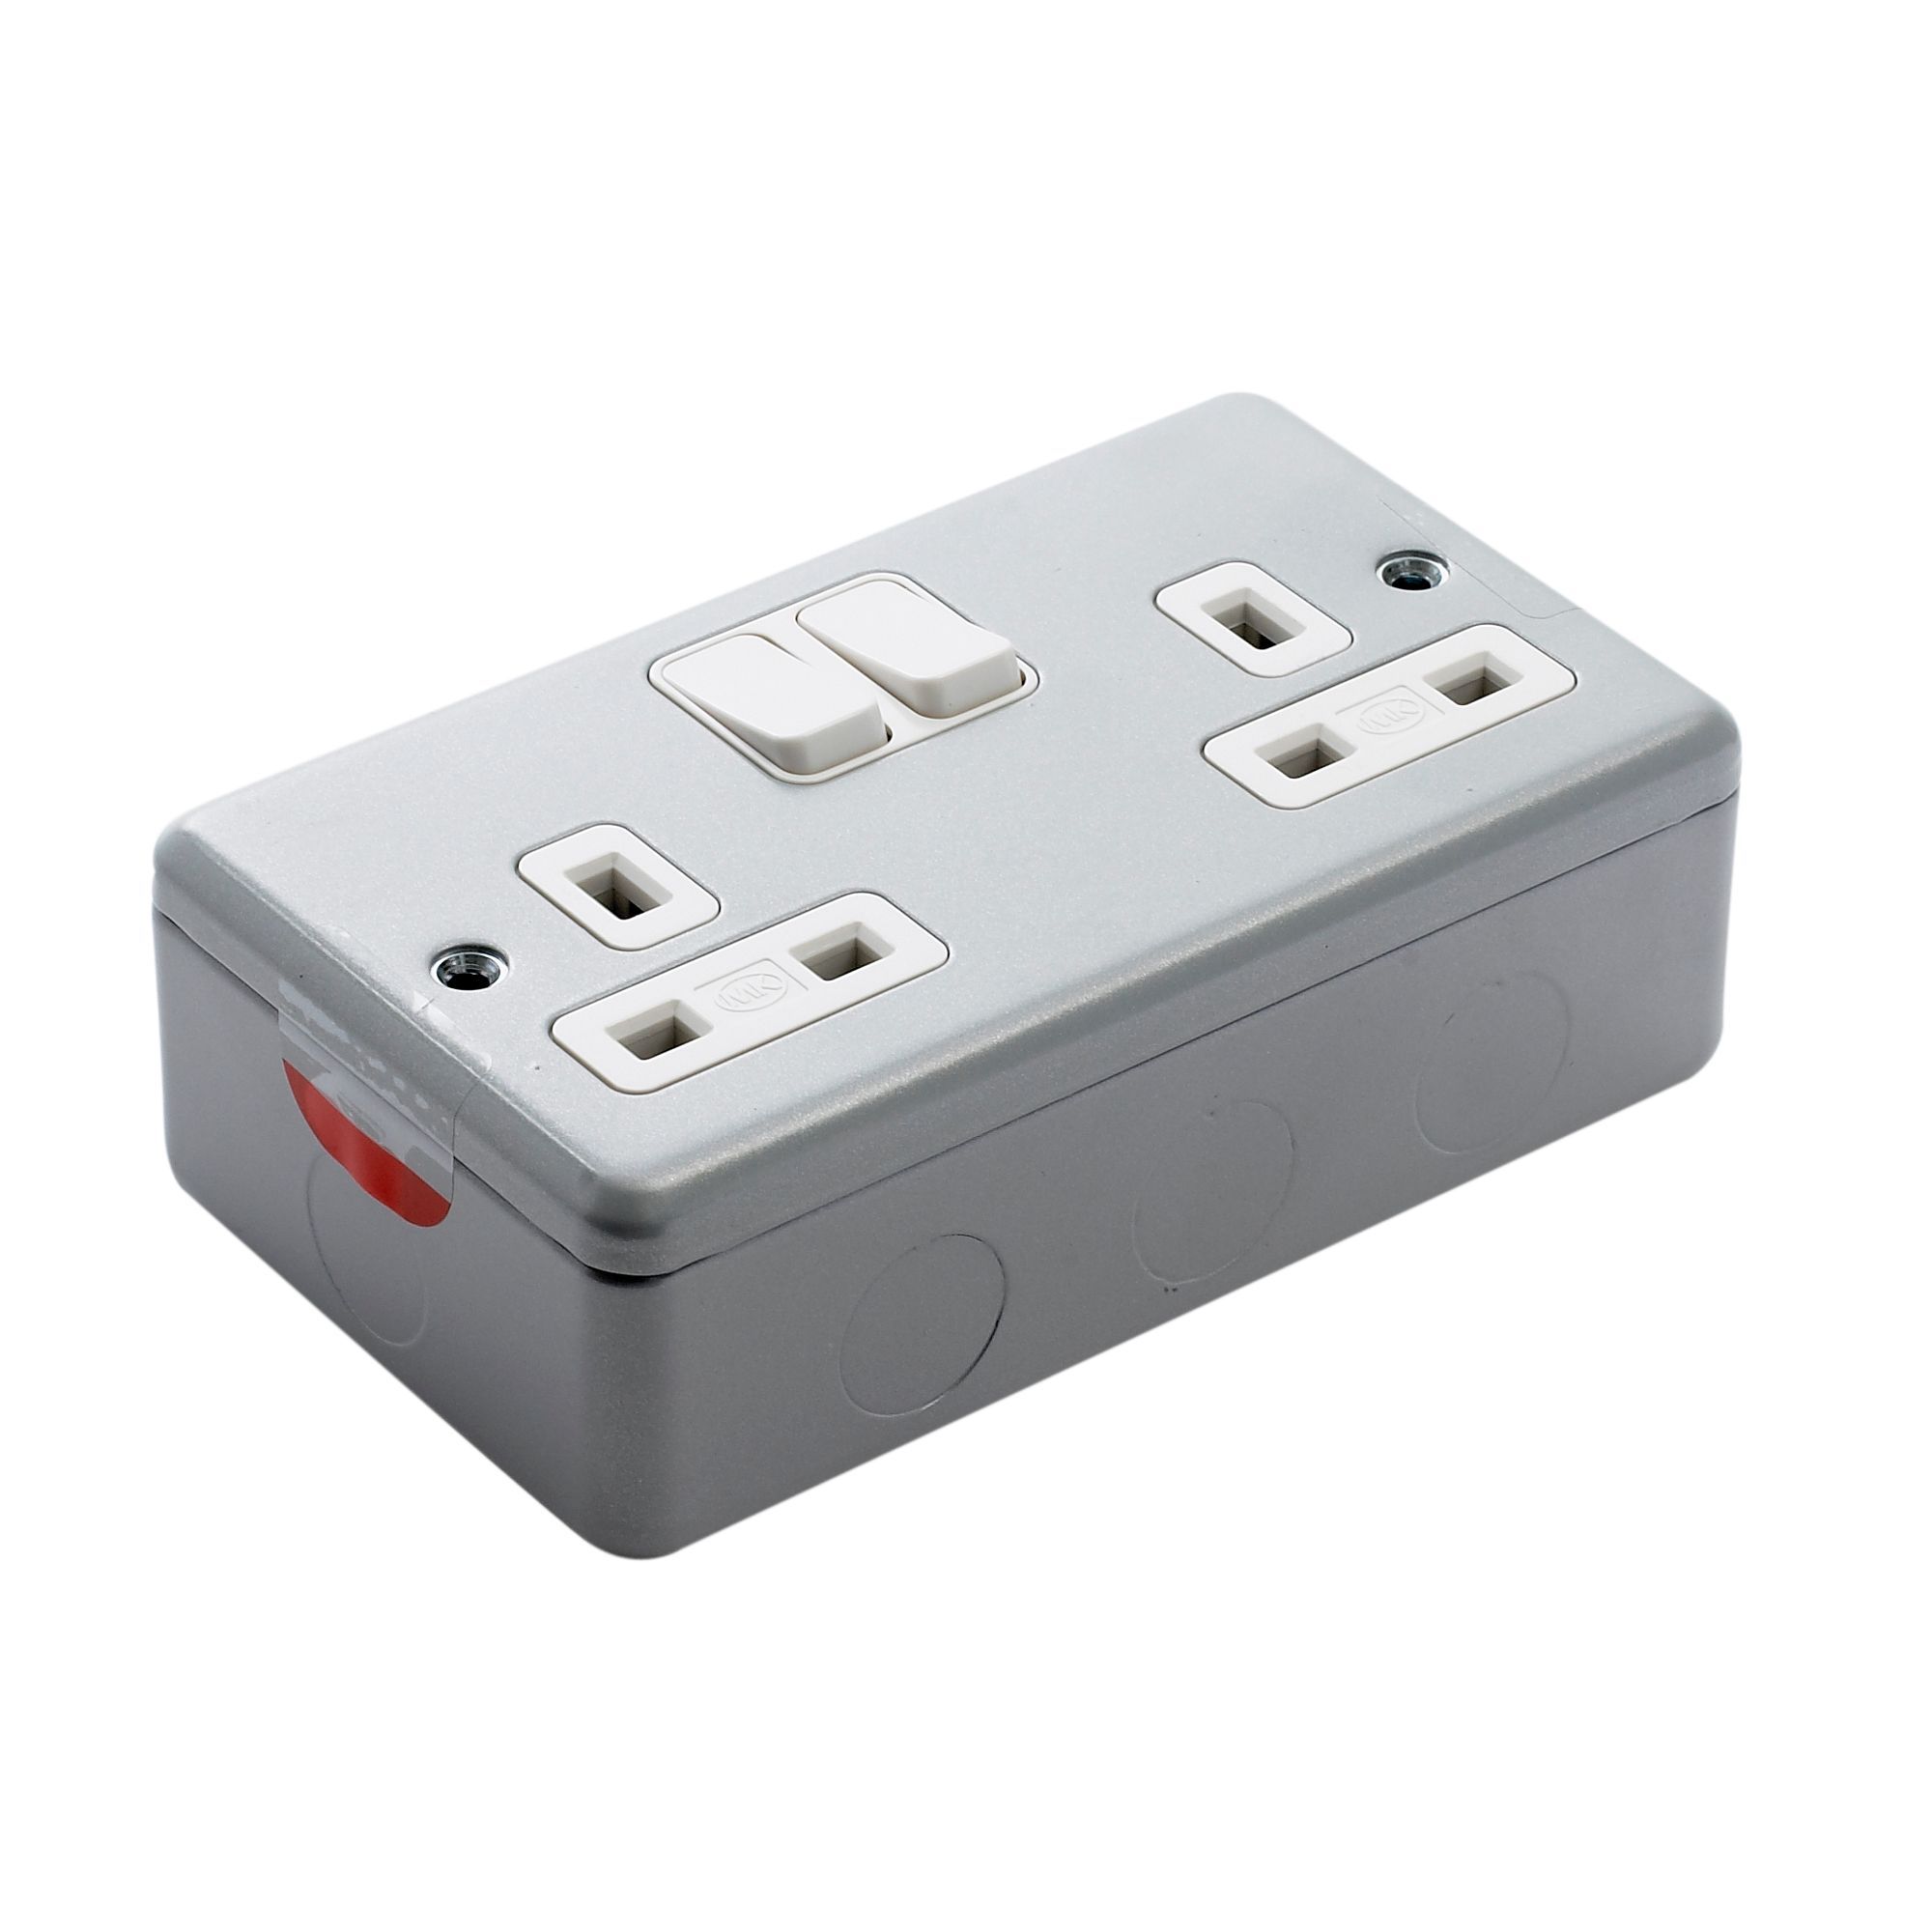 MK 13A Grey 2 gang Switched Metal-clad socket with White inserts